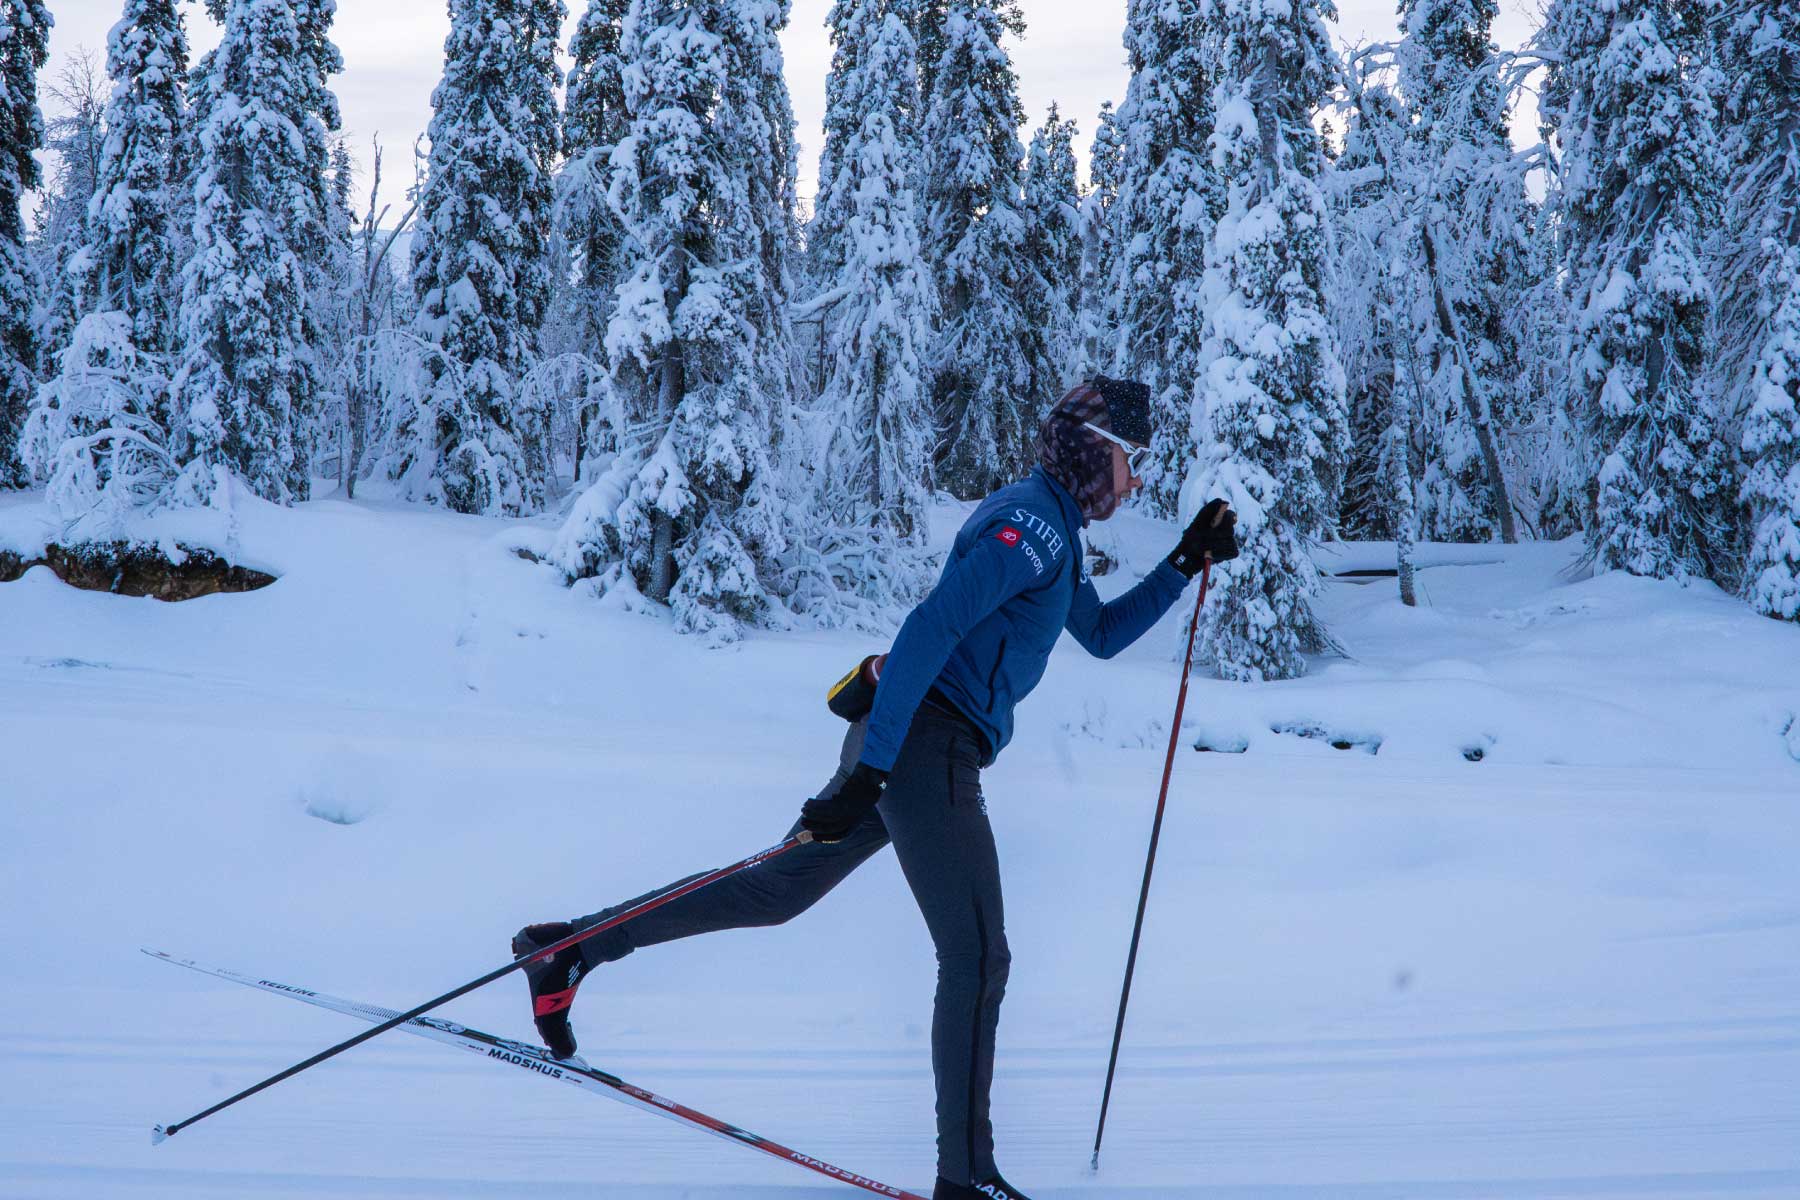 An Interview with Professional Nordic Skier, Ben Ogden